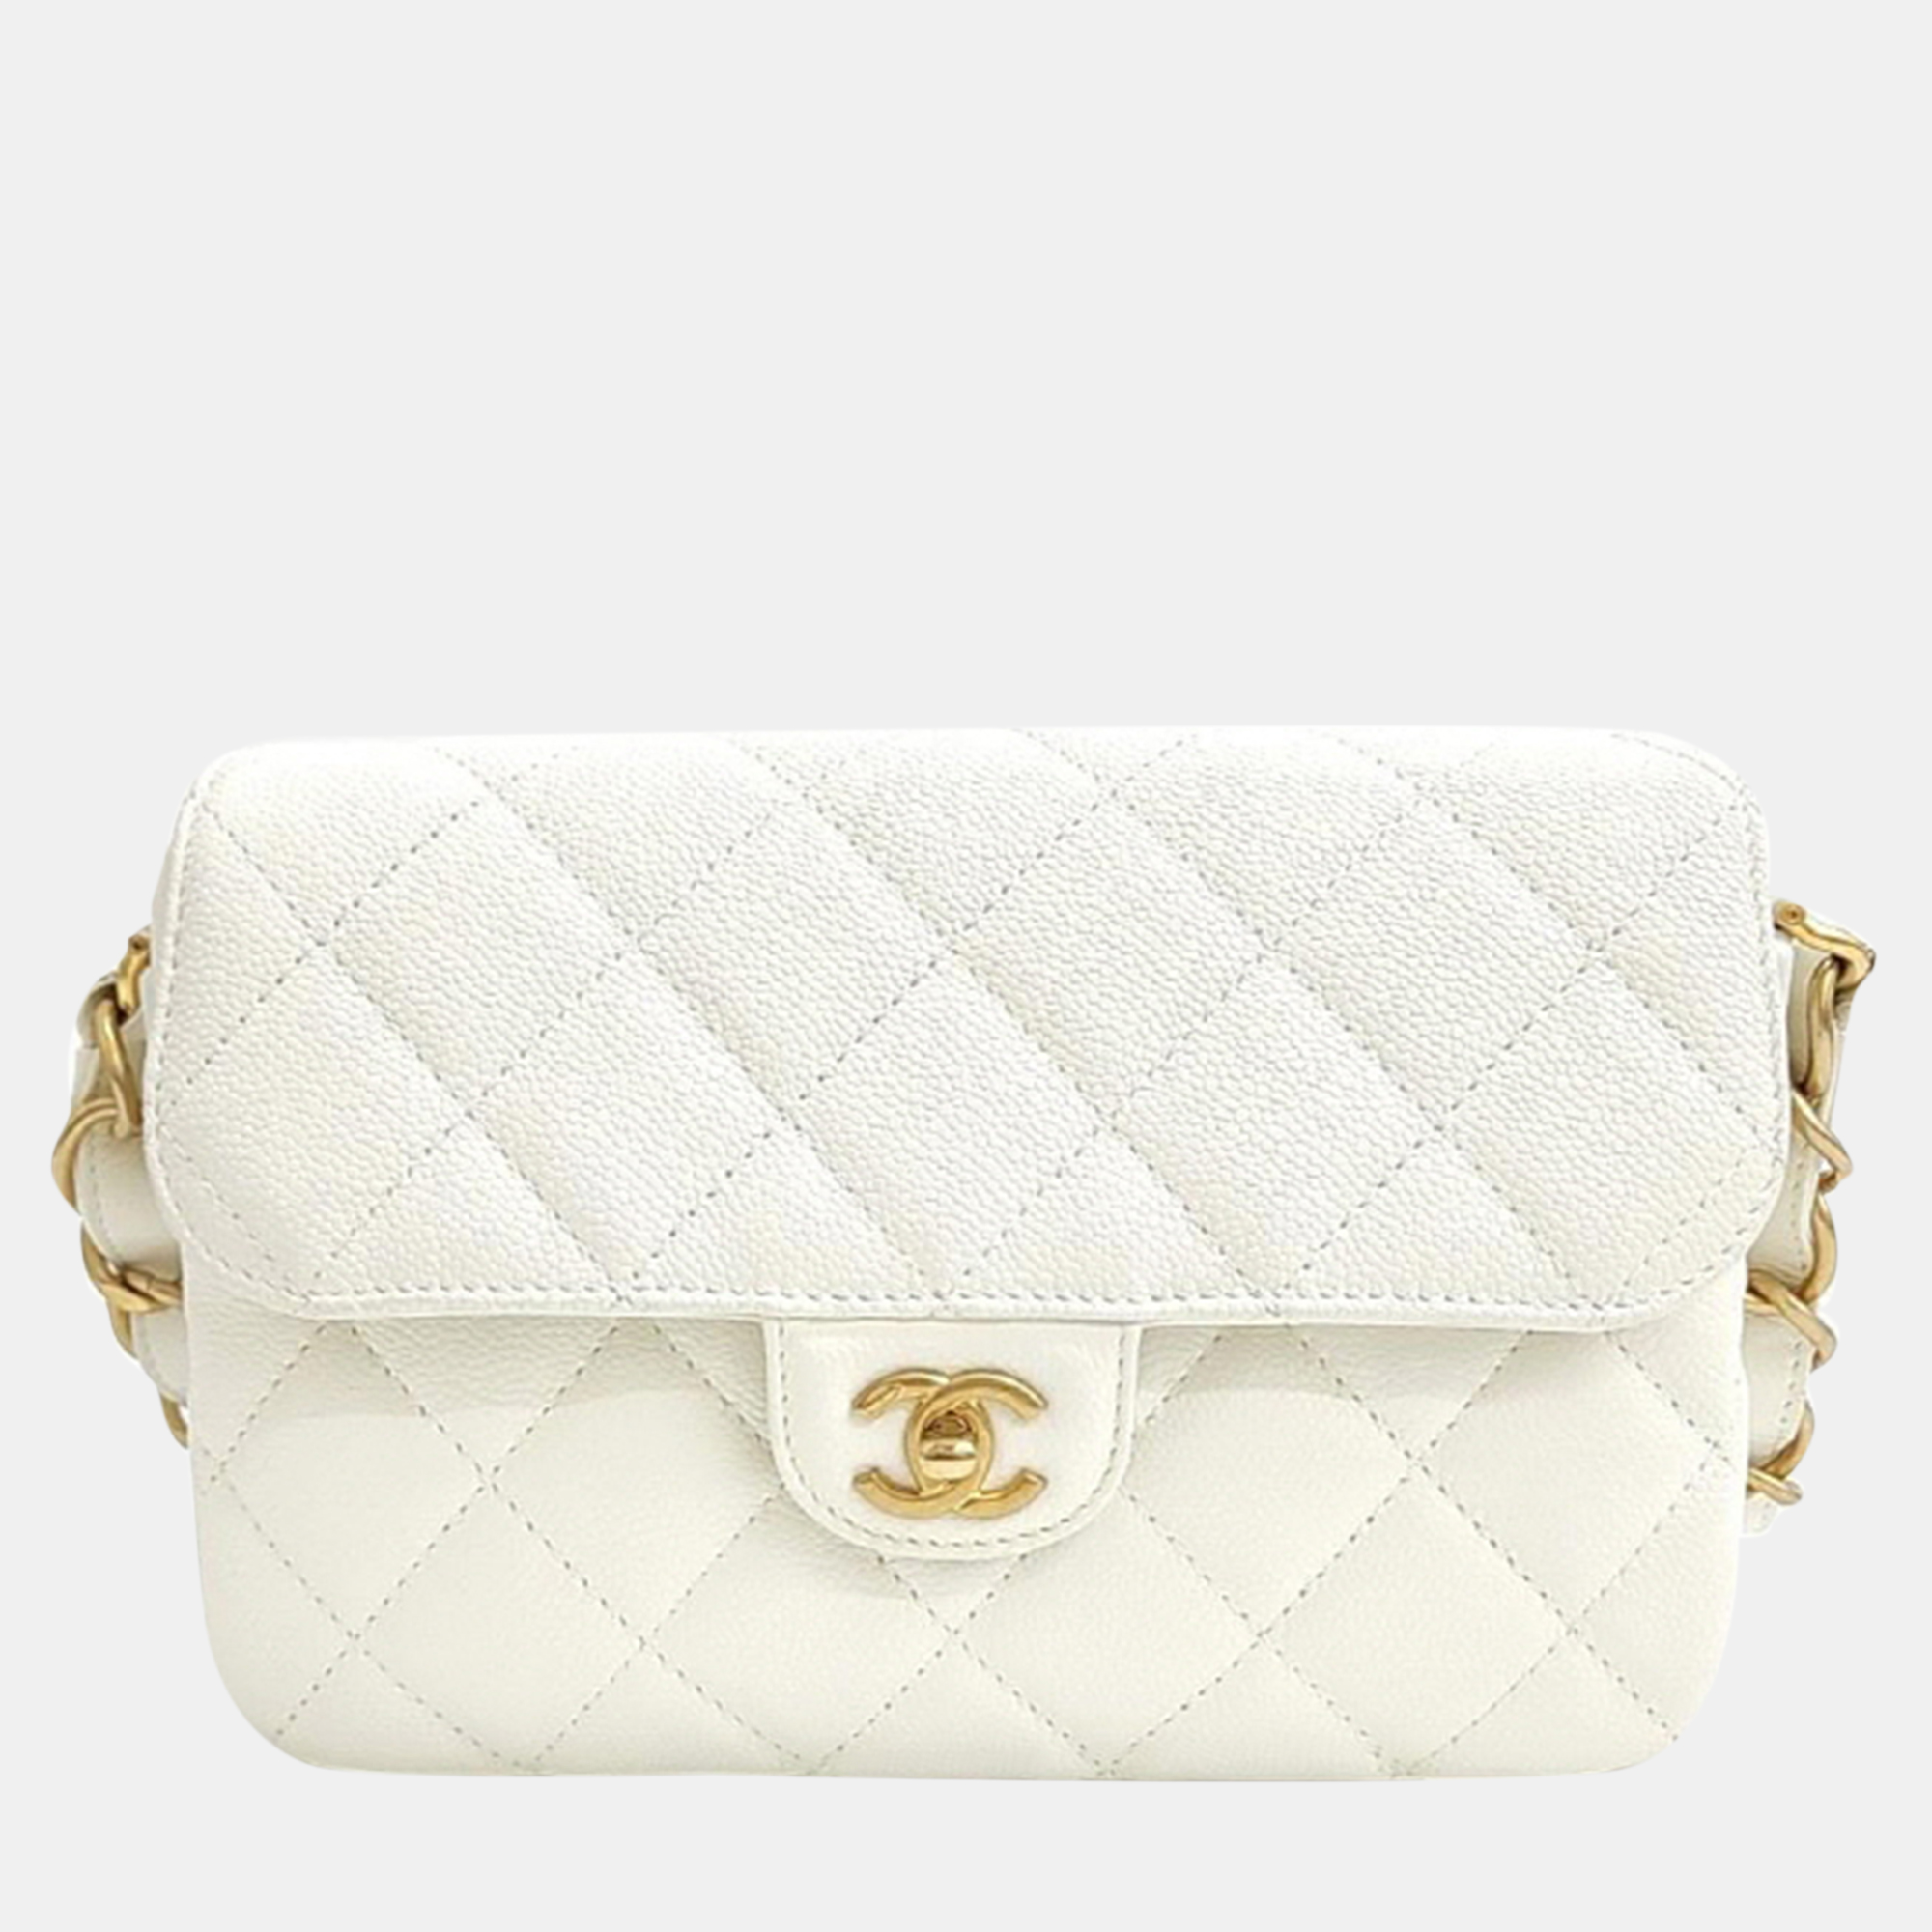 Chanel cream leather chain flap bag